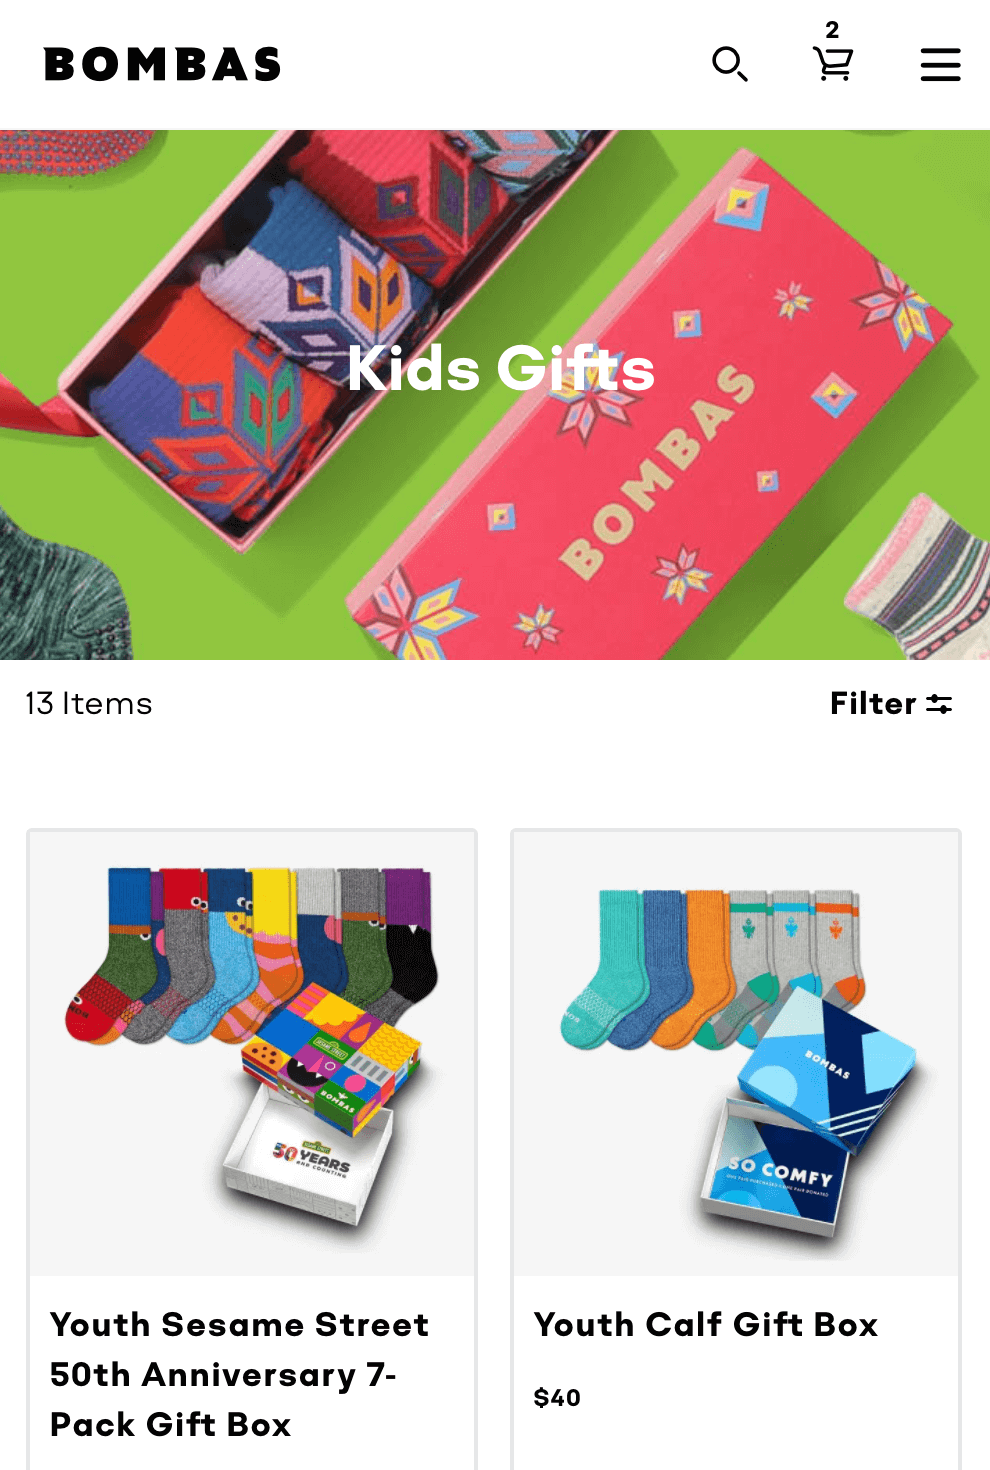 Bombas’ “Kids Gifts” section with special gift products.